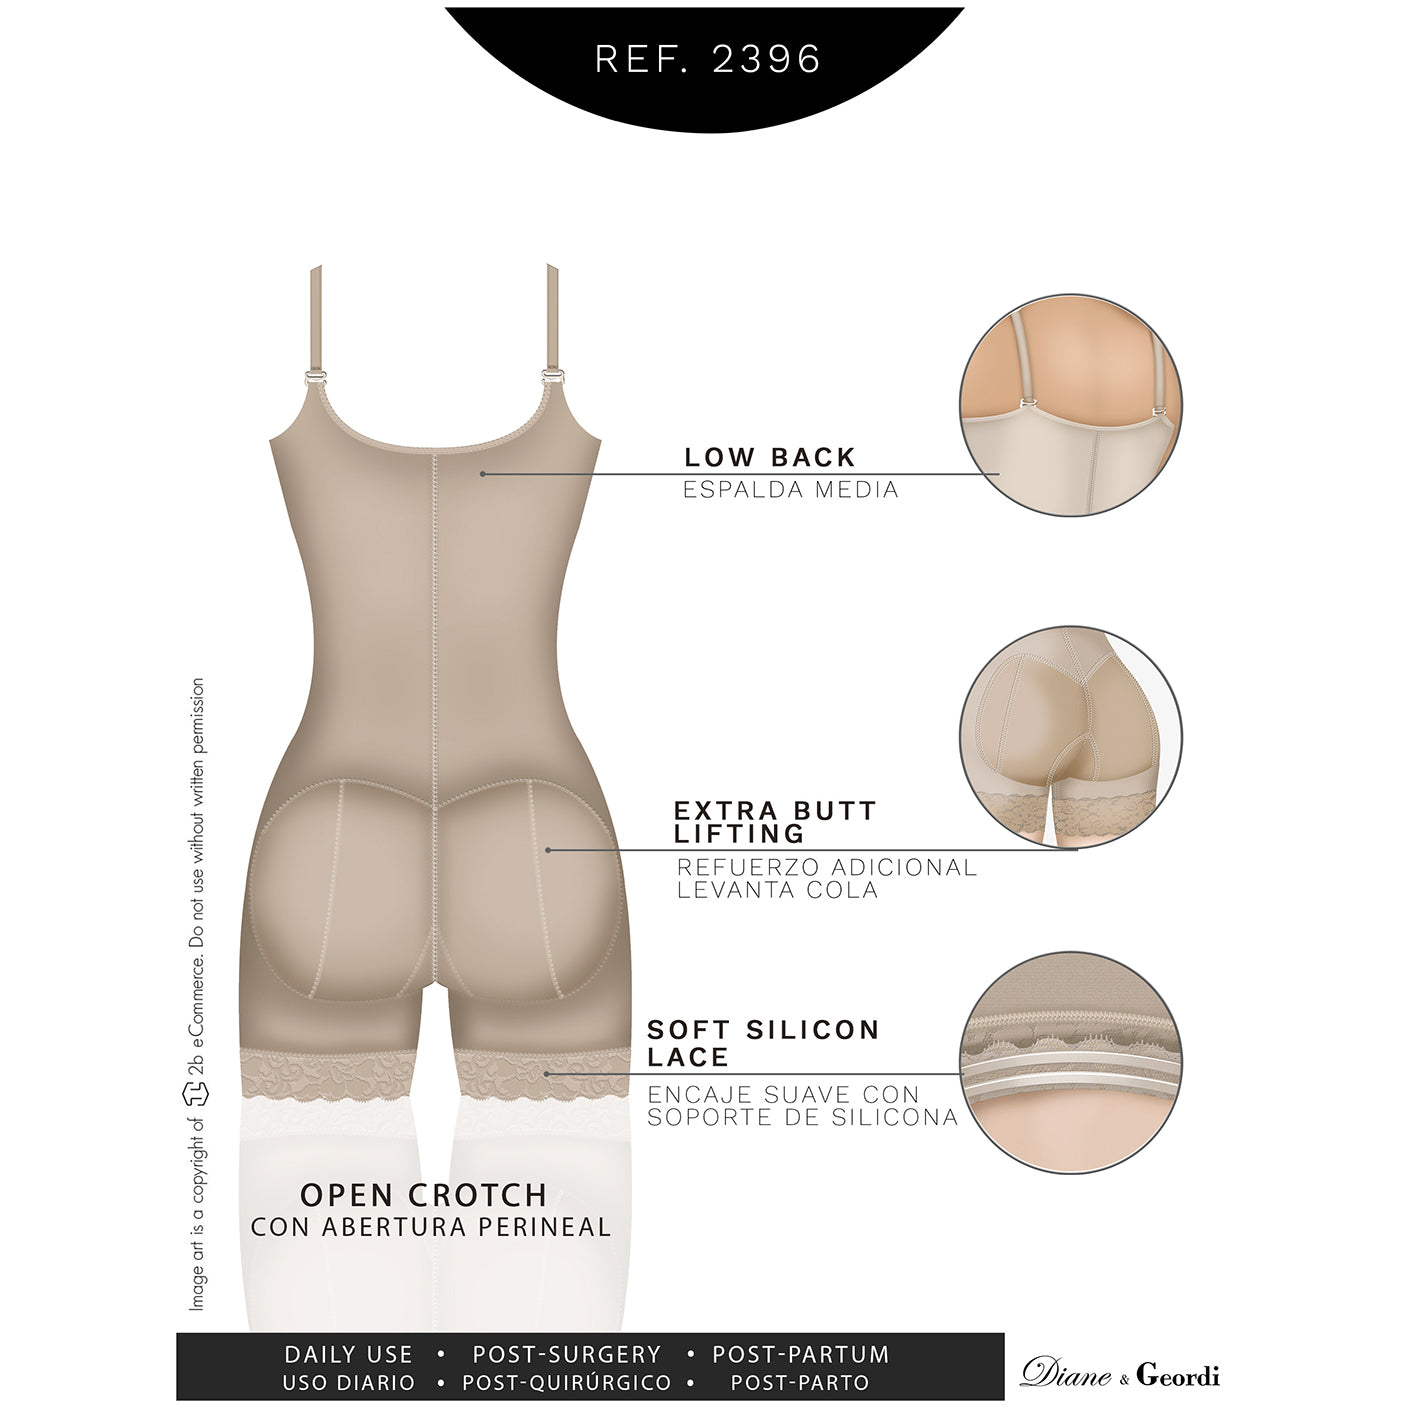 Diane & Geordi 2396: The journey for a stunning silhouette begins with this  Colombian faja for women 